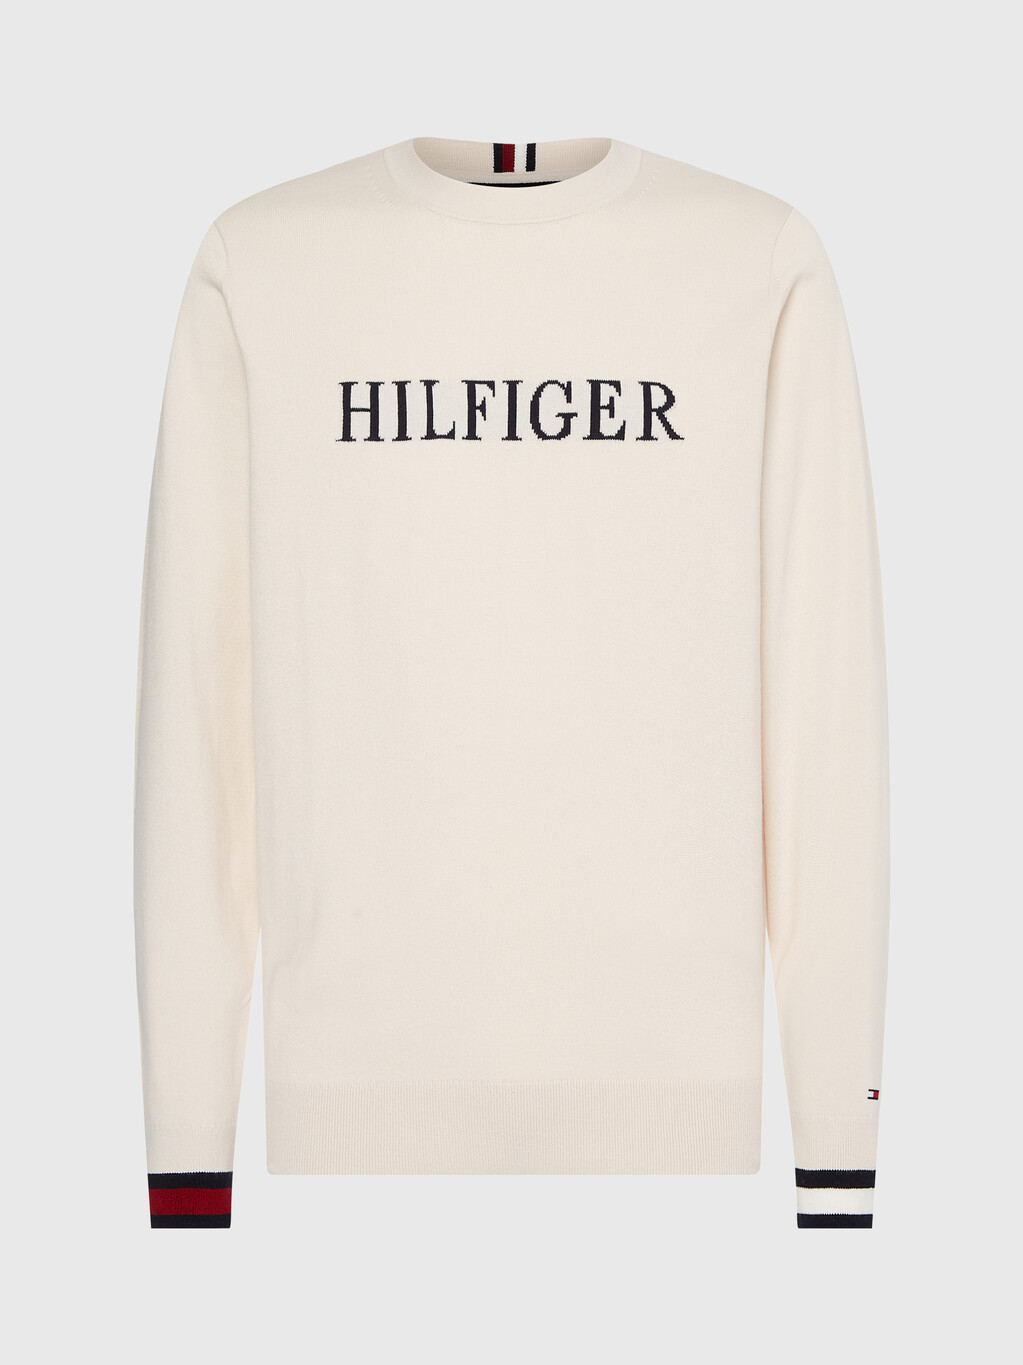 Logo Embroidery Crew Neck Jumper, Feather White, hi-res